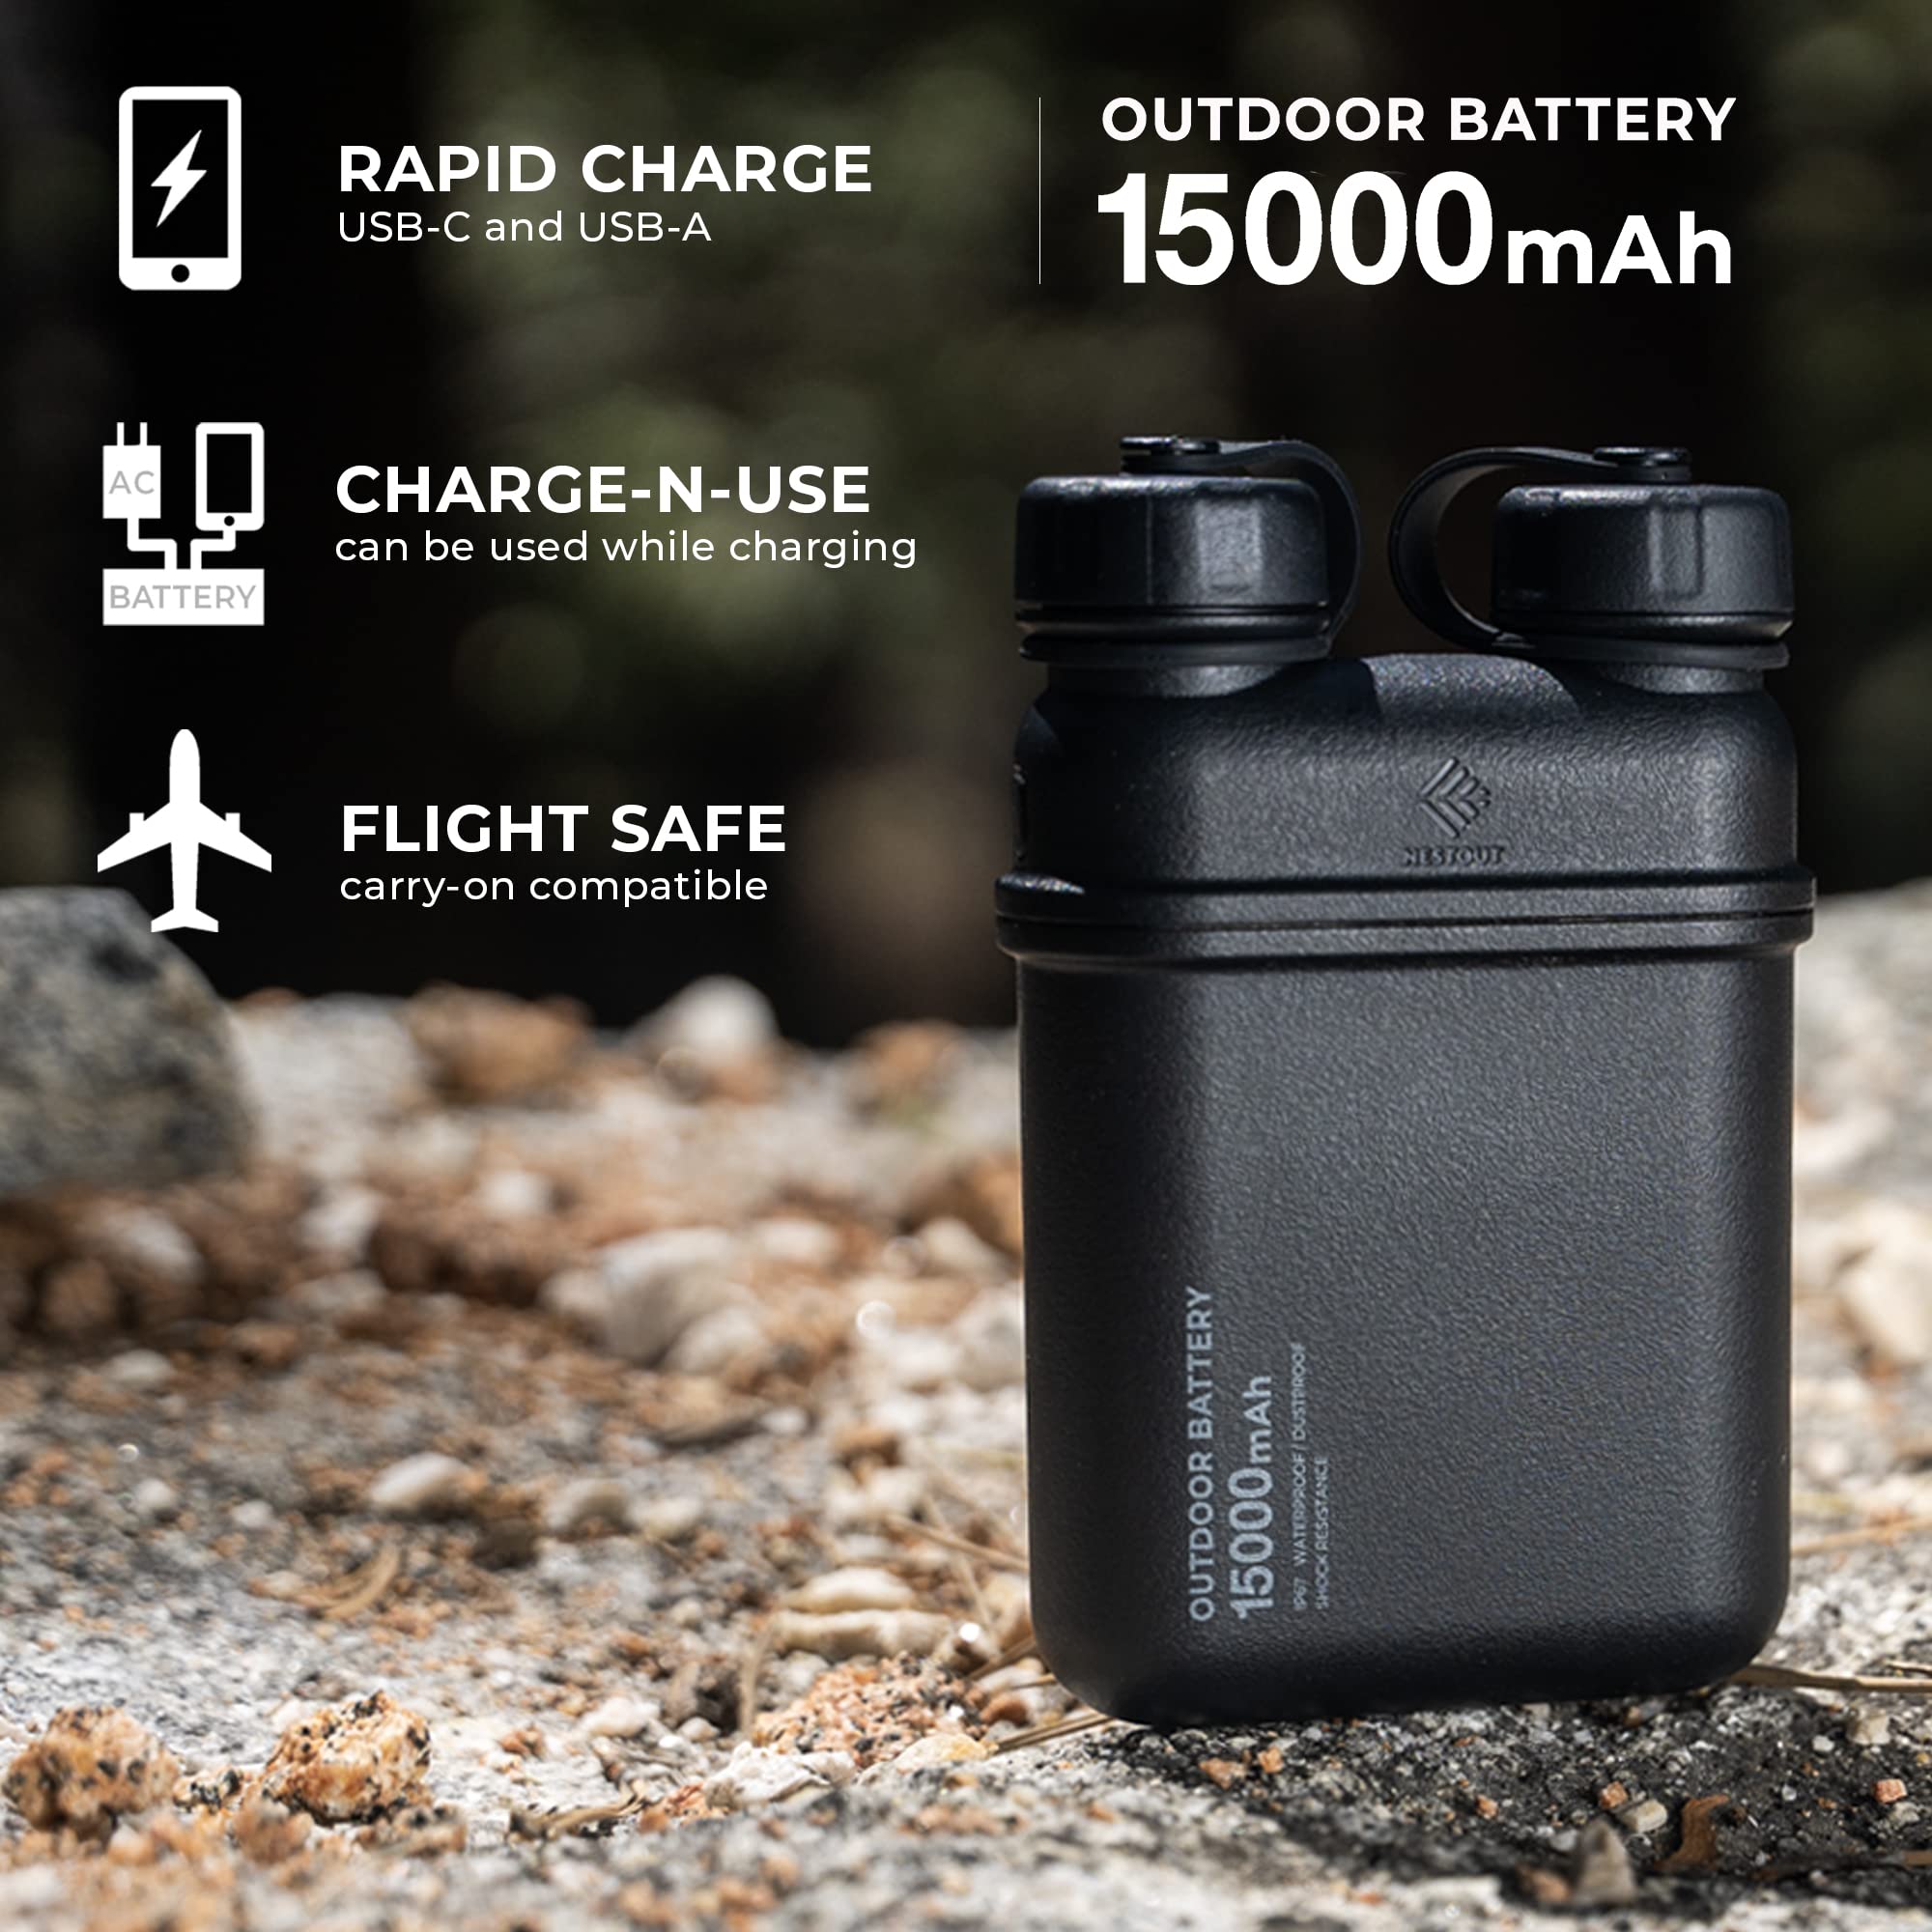 ELECOM NESTOUT Rugged Power Bank, 15000mAh Outdoor Charger, 32W USB-C Fast Charging PD, Waterproof IP67, Durable Shockproof, Battery Pack for iPhone Tablet Hiking Travel Camping (Beige, 15000mAh)